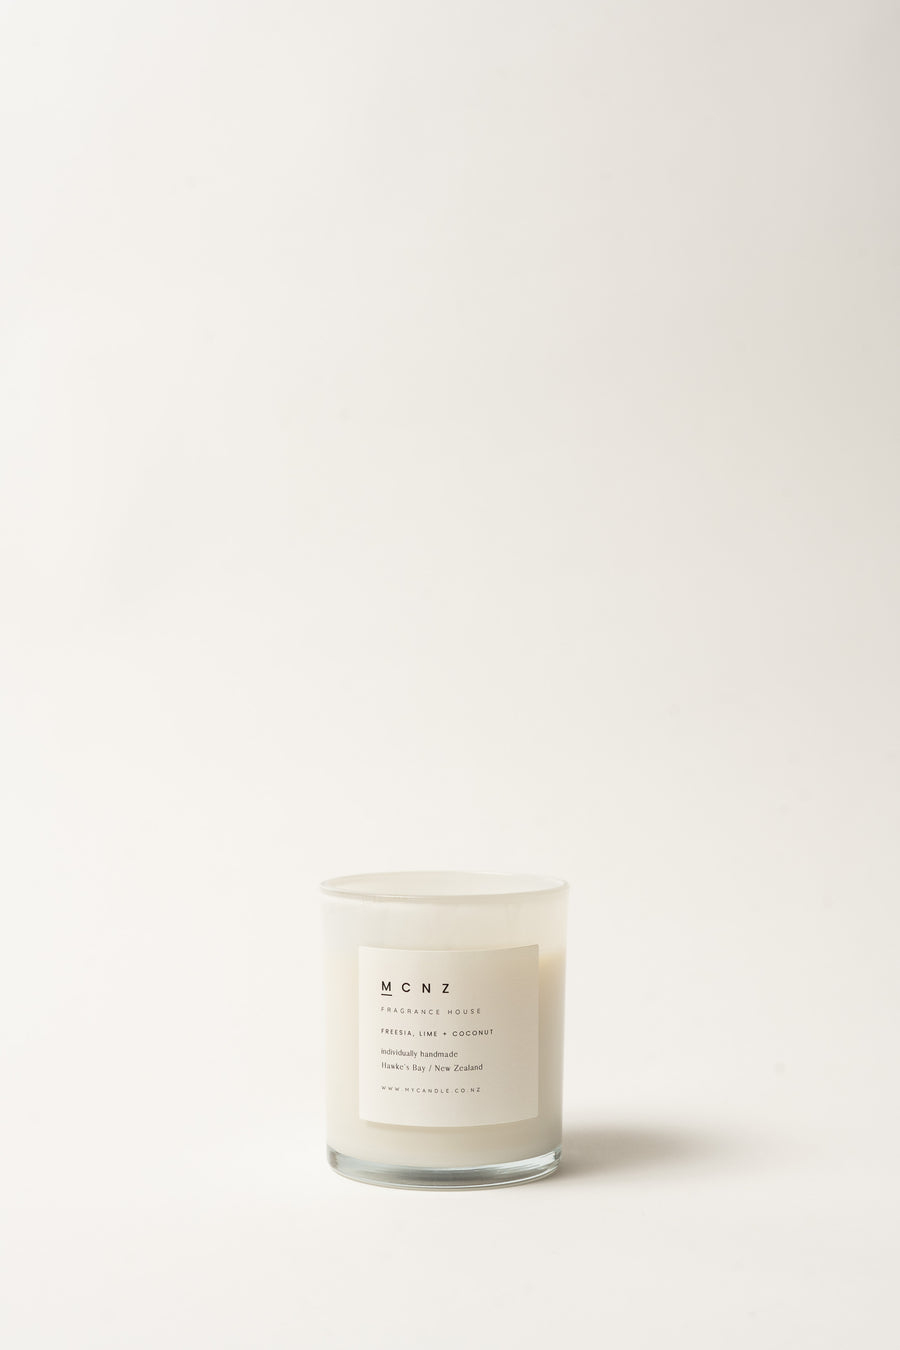 MCNZ Frosted Candle - Freesia, Lime + Coconut